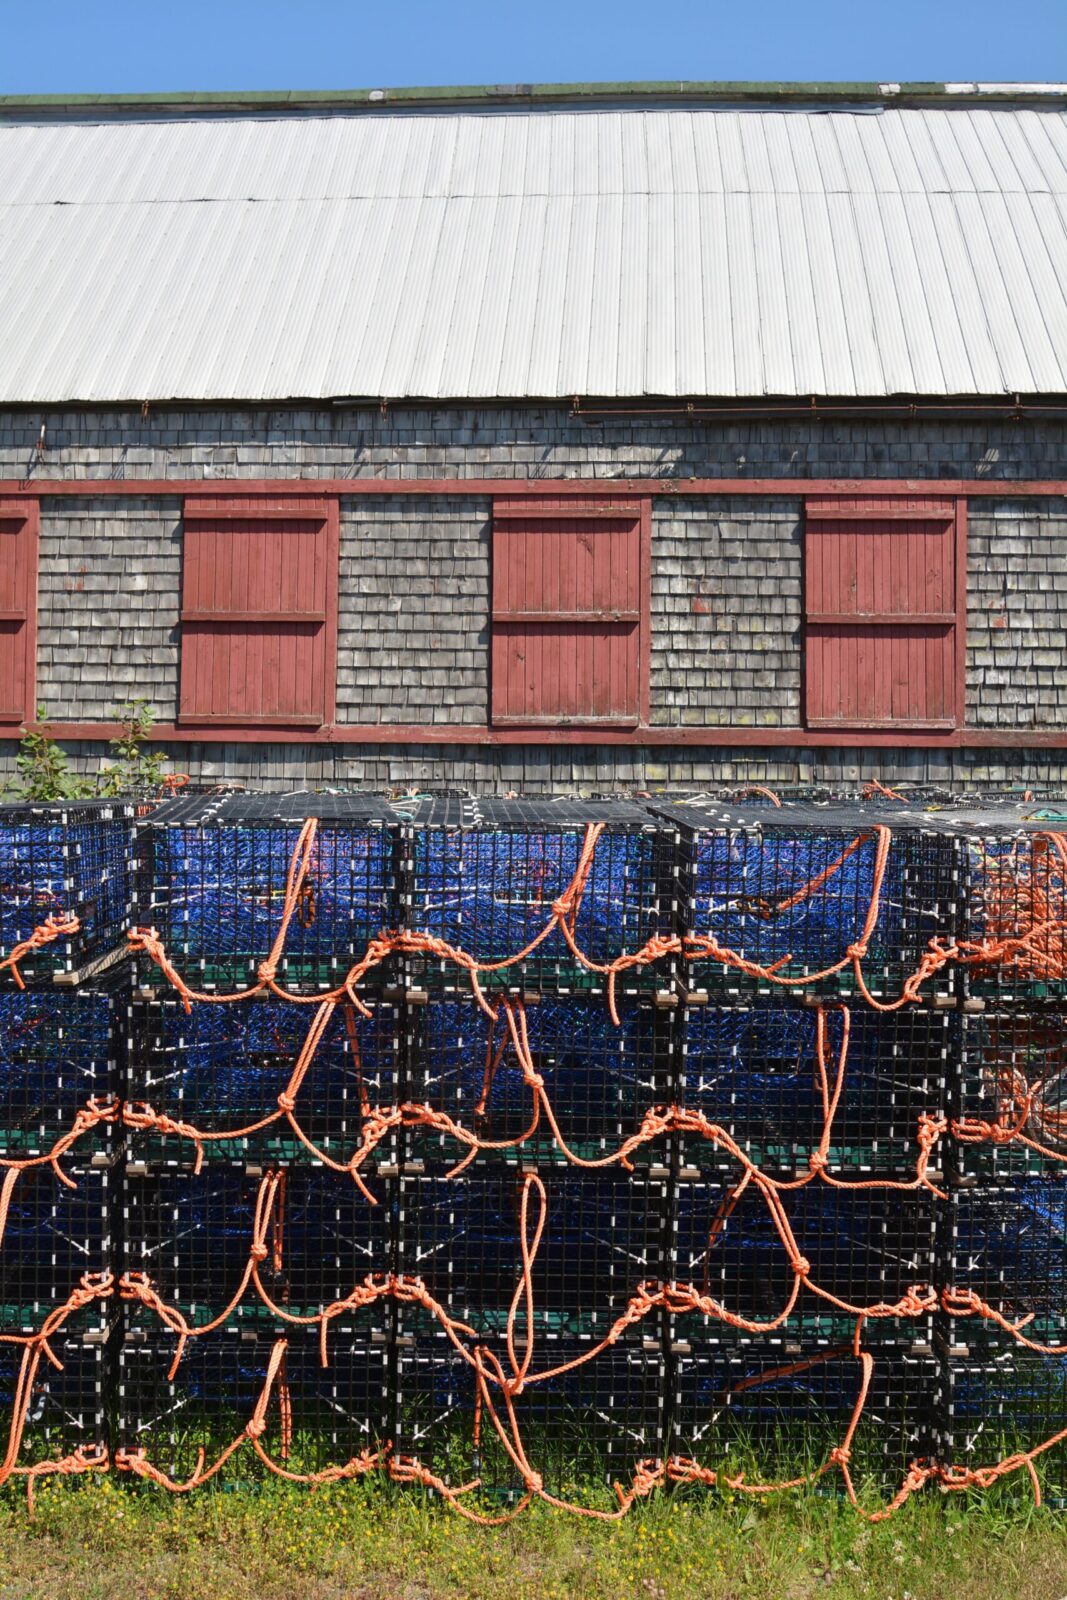 A row of lobster cages in front of a building.